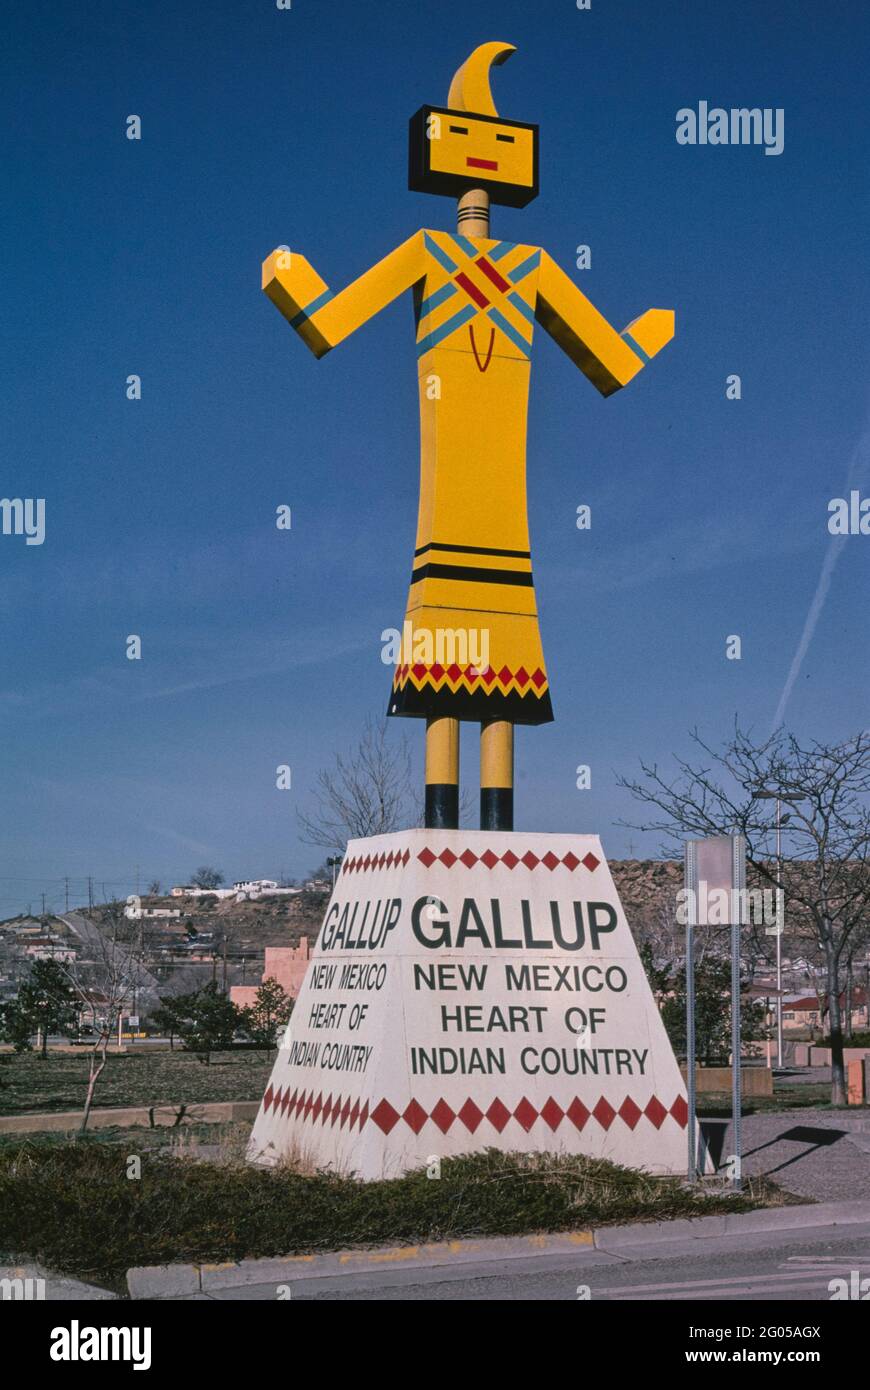 2000er-USA – Gallup Kachina-Schild, Heart of Indian Country, Gallup, New Mexico 2003 Stockfoto